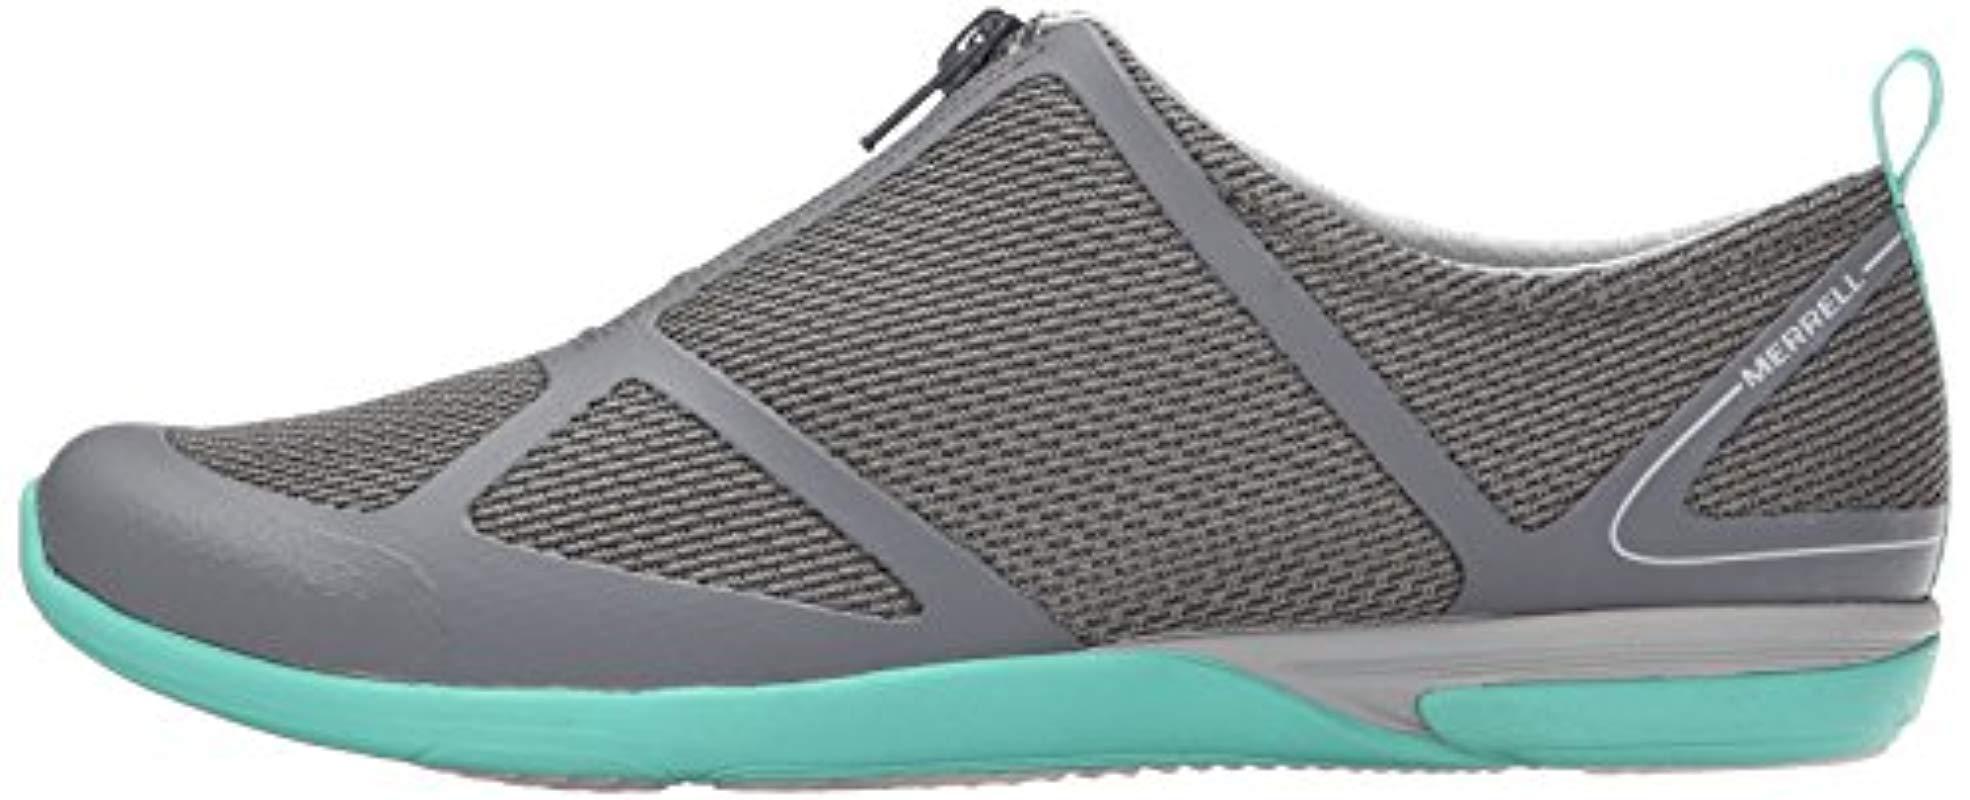 Merrell Ceylon Sport Zip Shoes, Lightweight And In Breathable Mesh And Zip-up Closure | Lyst